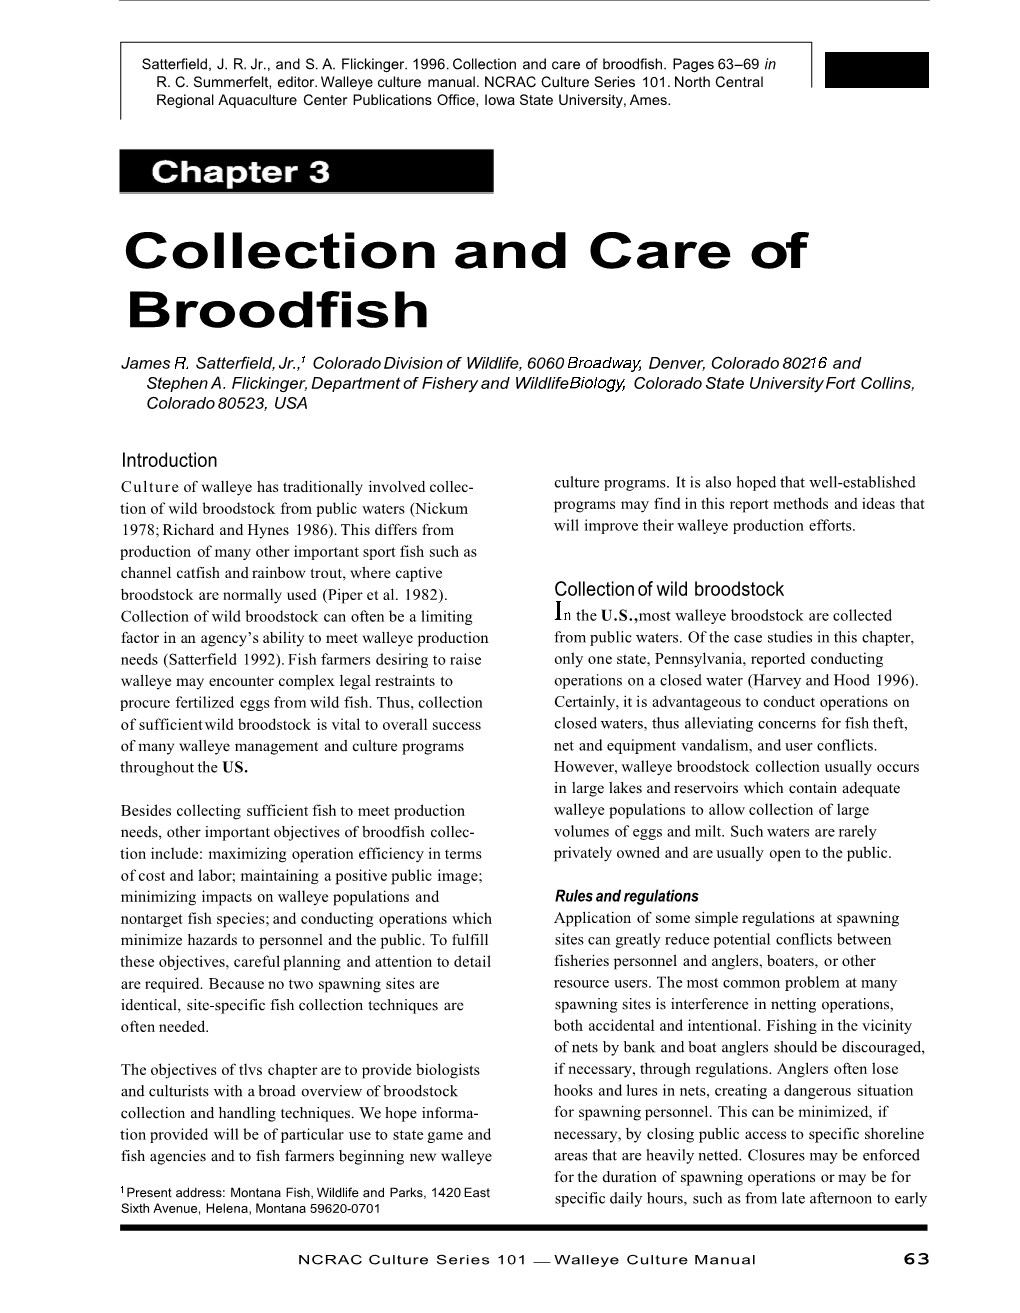 Collection and Care of Broodfish